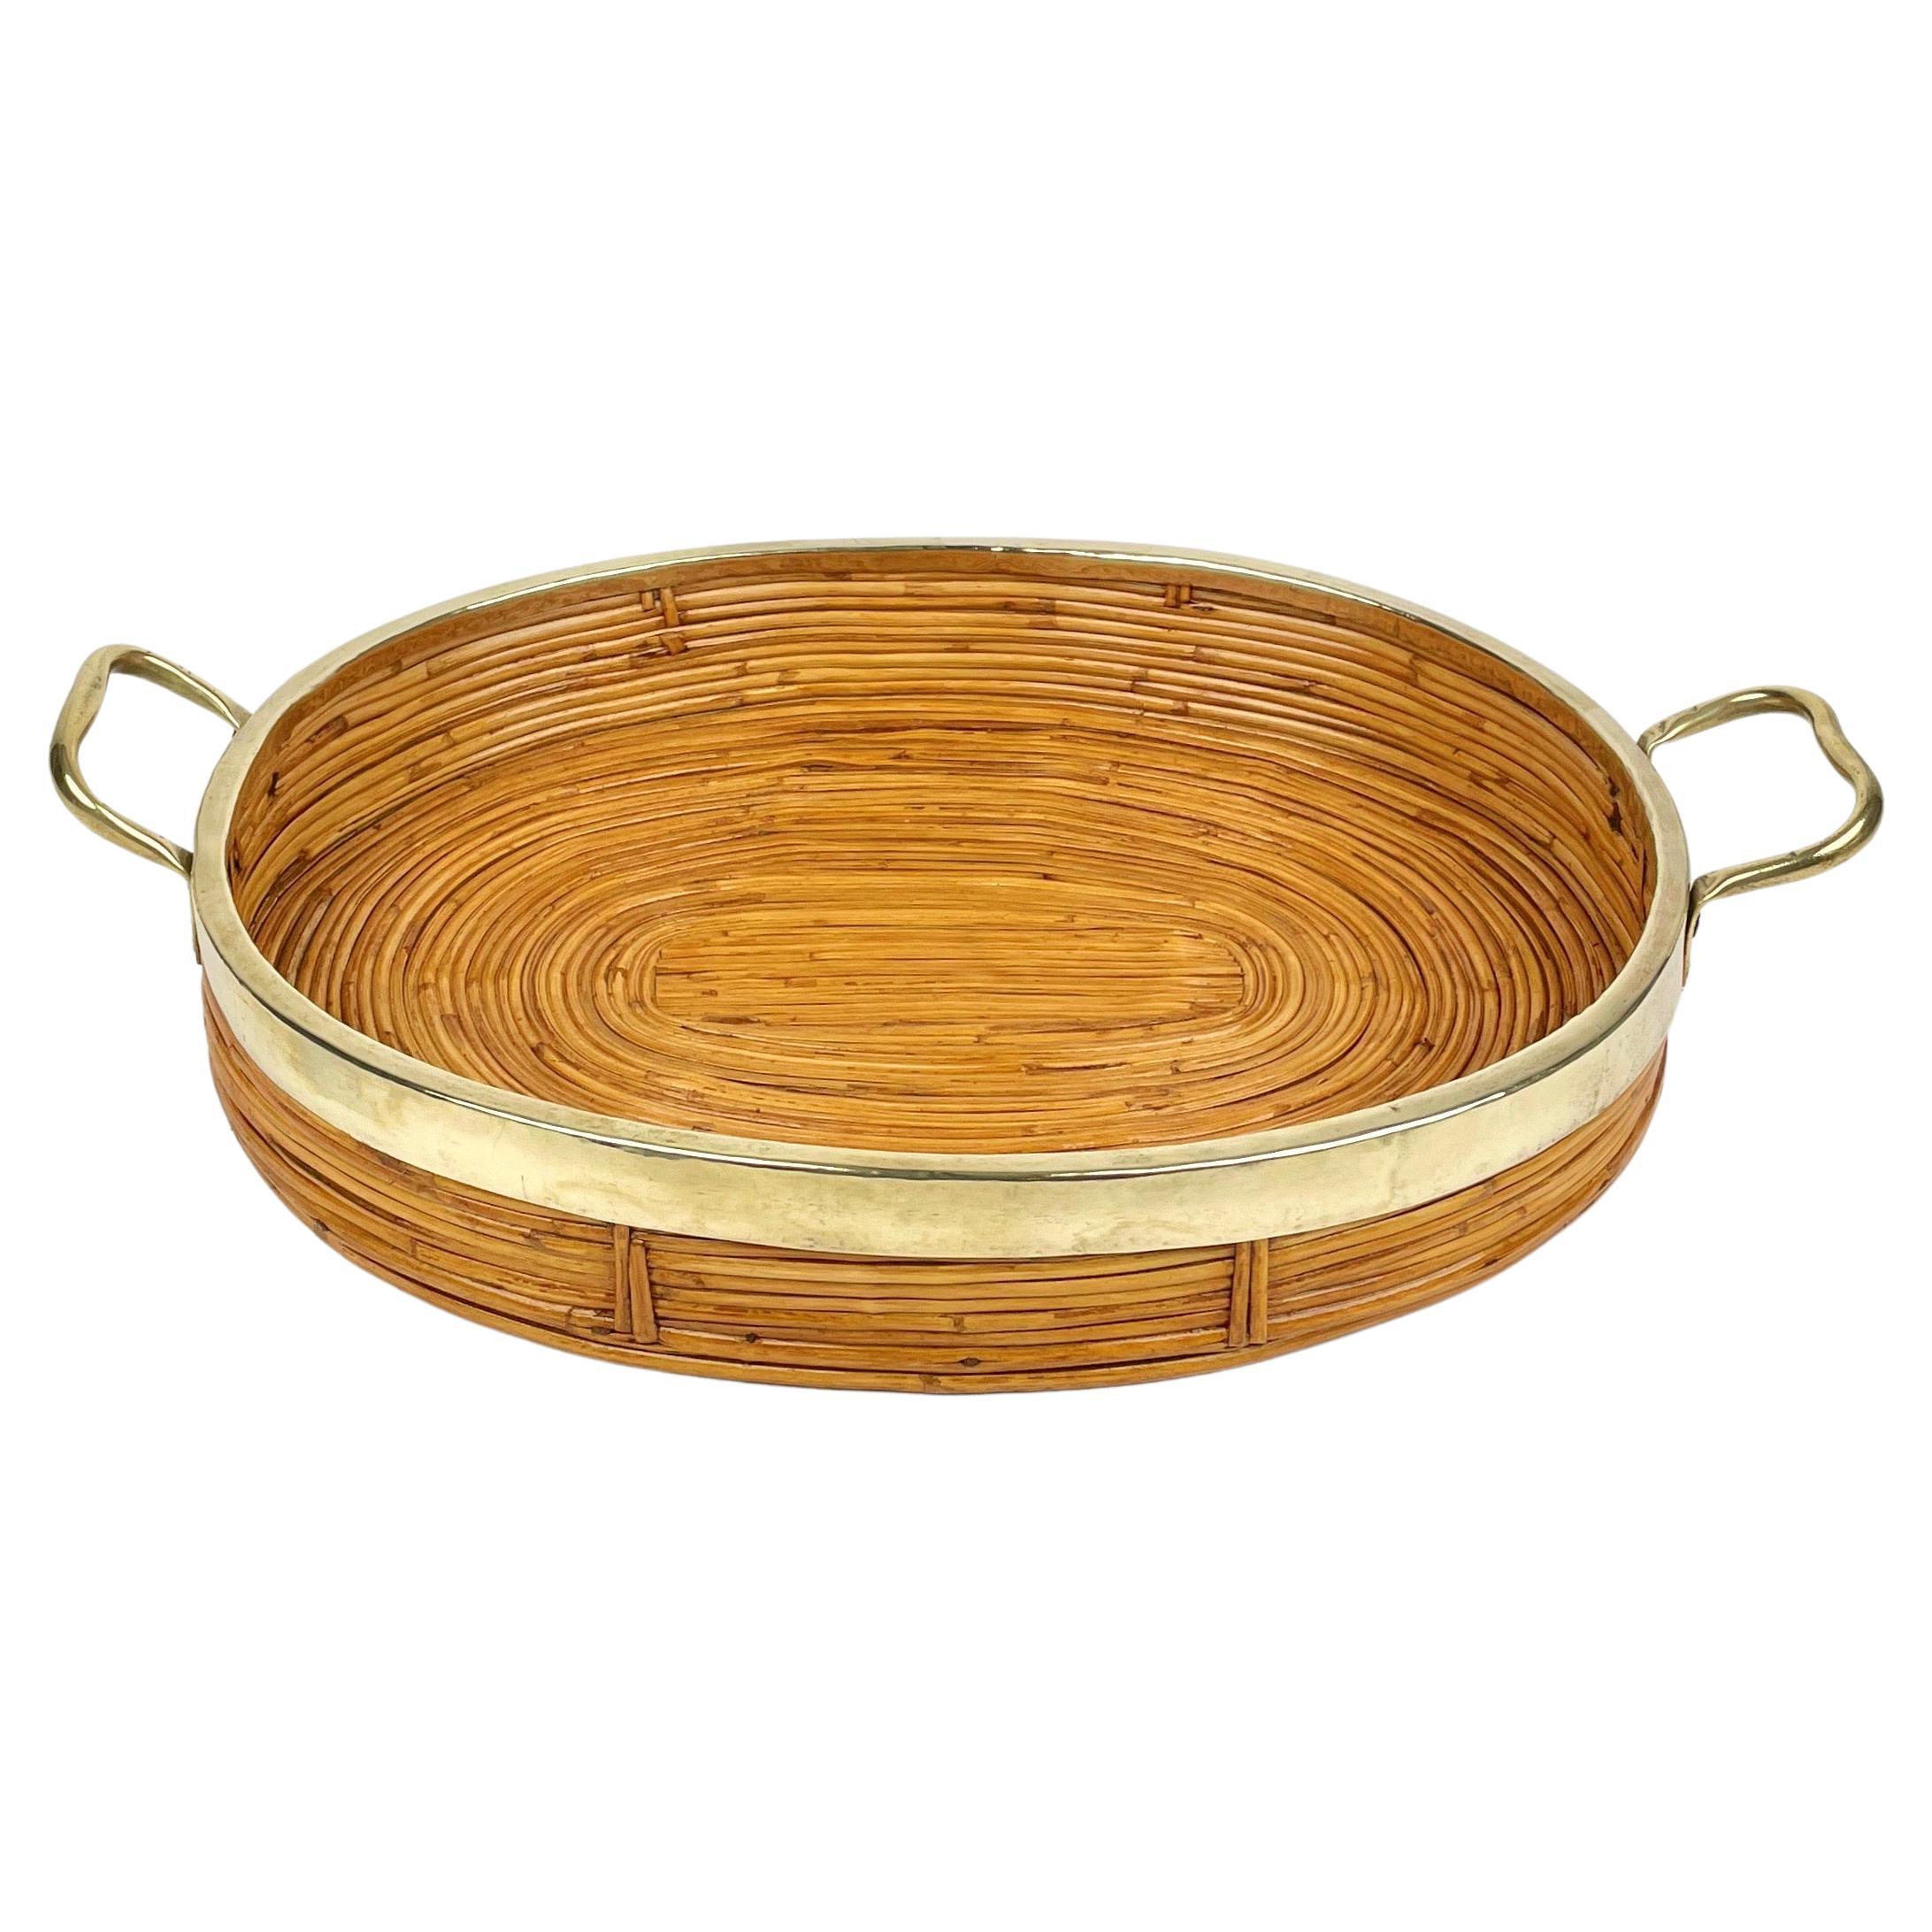 Oval Serving Tray Bamboo, Rattan & Brass, Italy 1970s For Sale